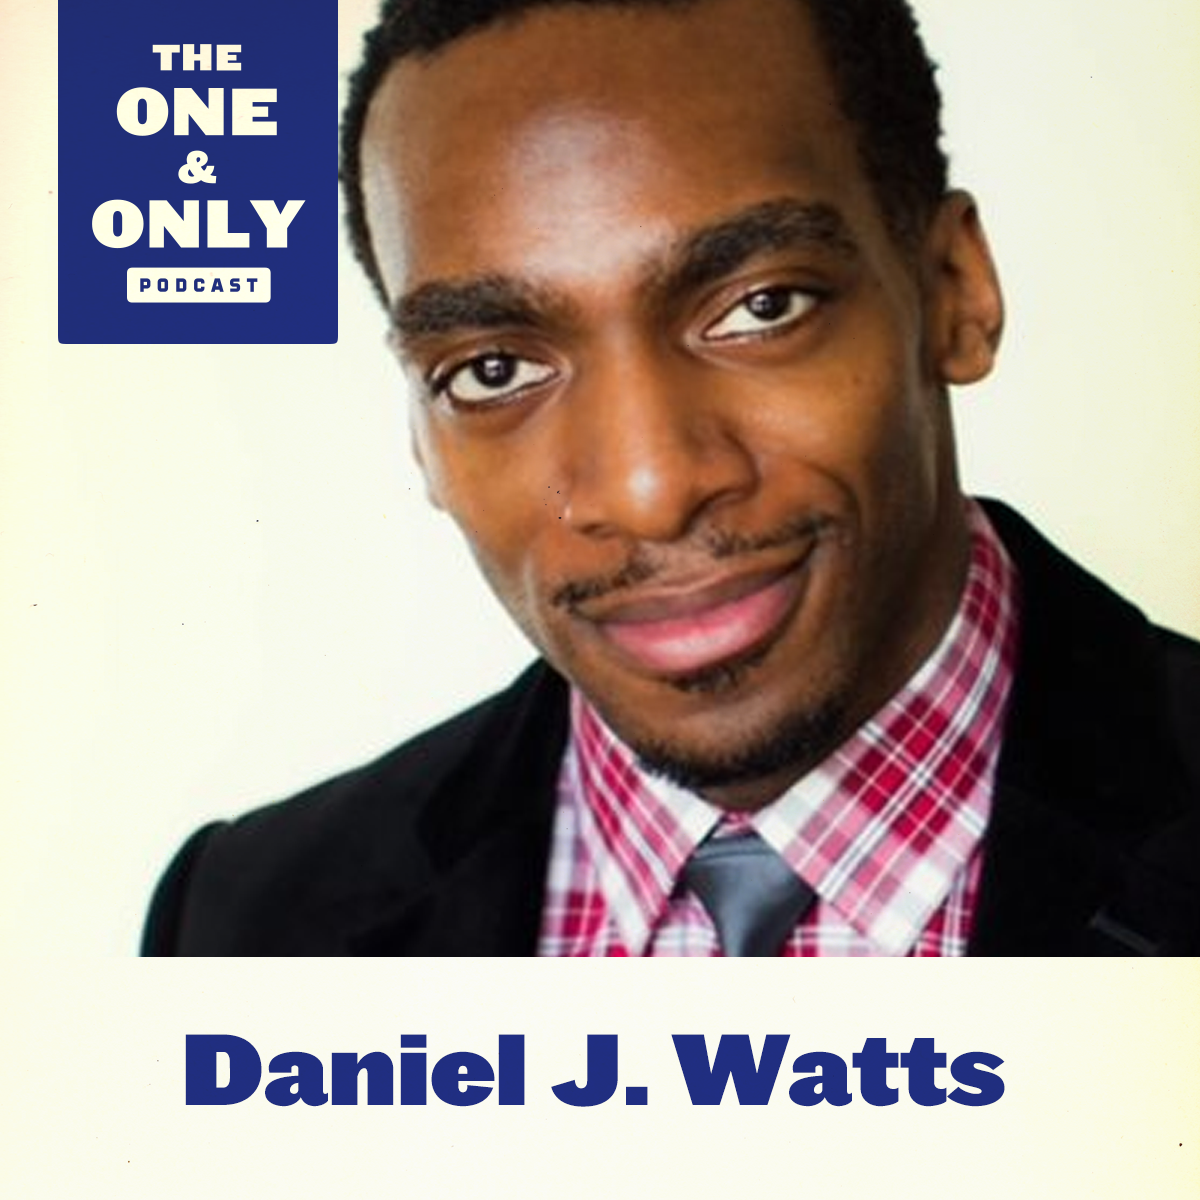 Daniel J Watts Interview | Are You Being Real?